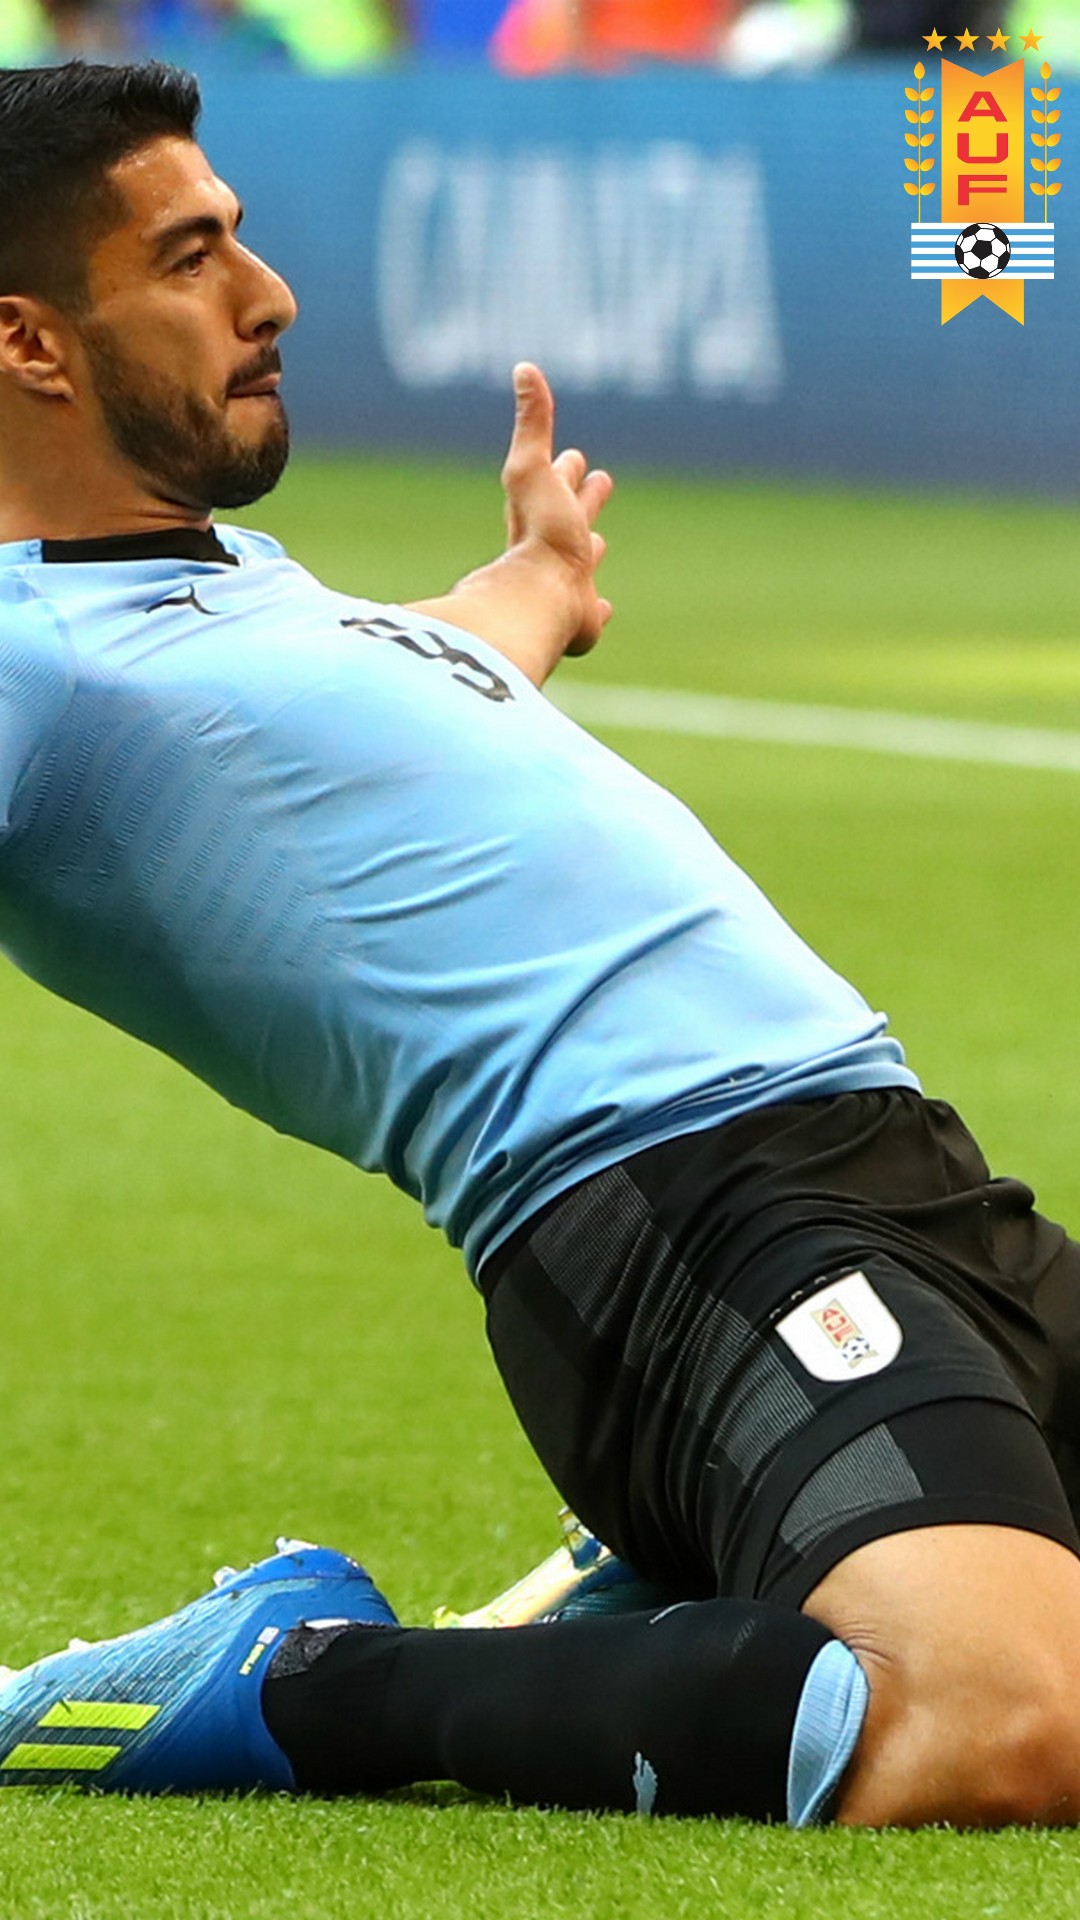 Luis Suarez Uruguay iPhone 7 Plus Wallpaper With Resolution 1080X1920 pixel. You can make this wallpaper for your Mac or Windows Desktop Background, iPhone, Android or Tablet and another Smartphone device for free